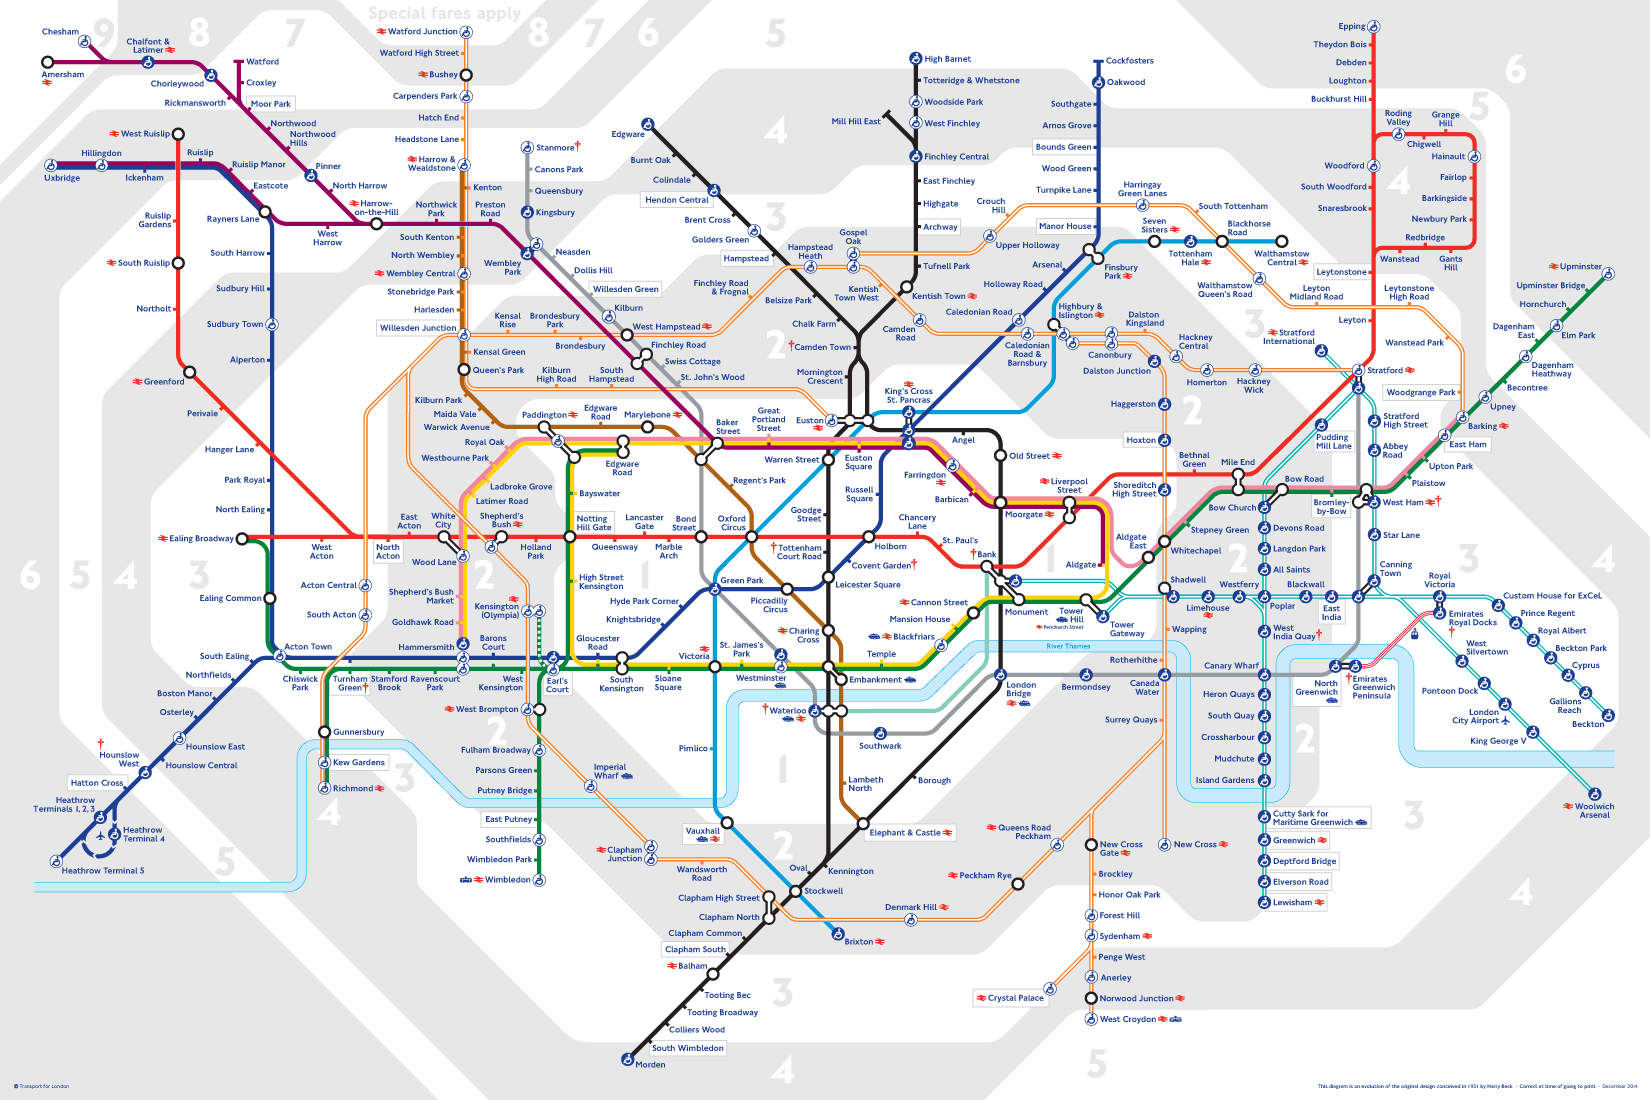 Typical London Tube map